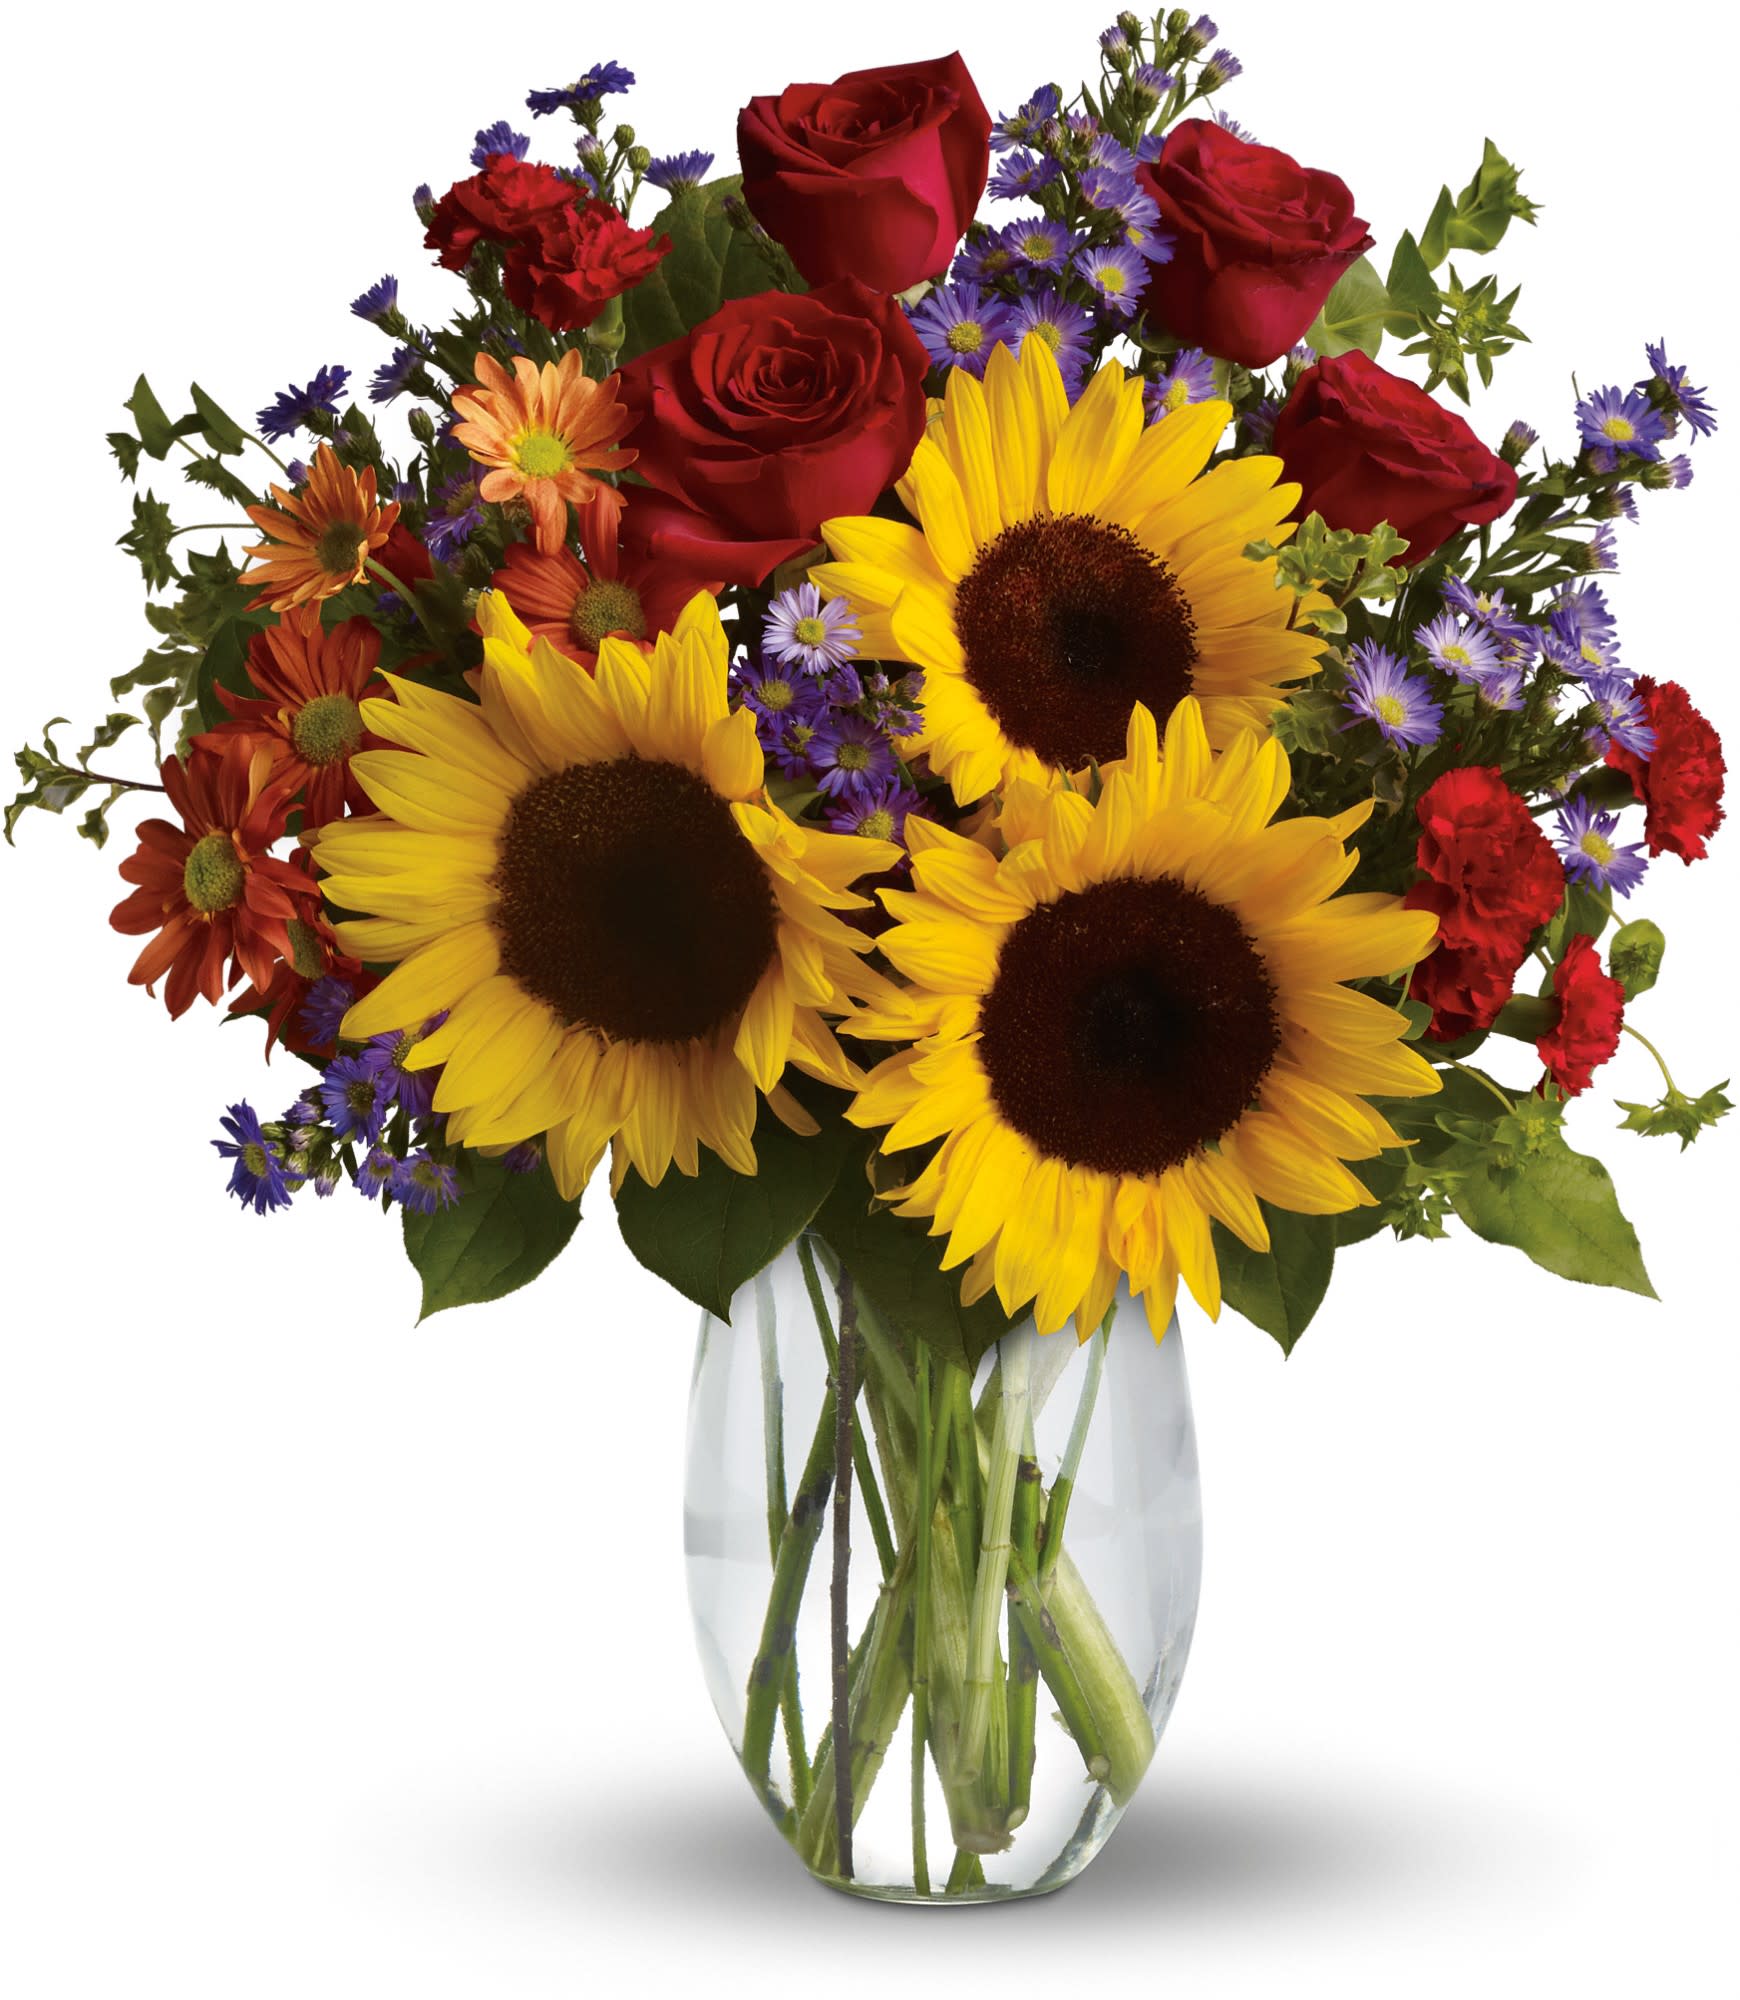 Pure Happiness  T171-1 - Sunny sunflowers, red roses and miniature carnations, bronze daisy spray chrysanthemums, large lavender monte cassino asters and autumn greens are beautifully arranged in a clear glass vase. Approximately 19 1/2&quot; W x 21 1/2&quot; H. T171-1A